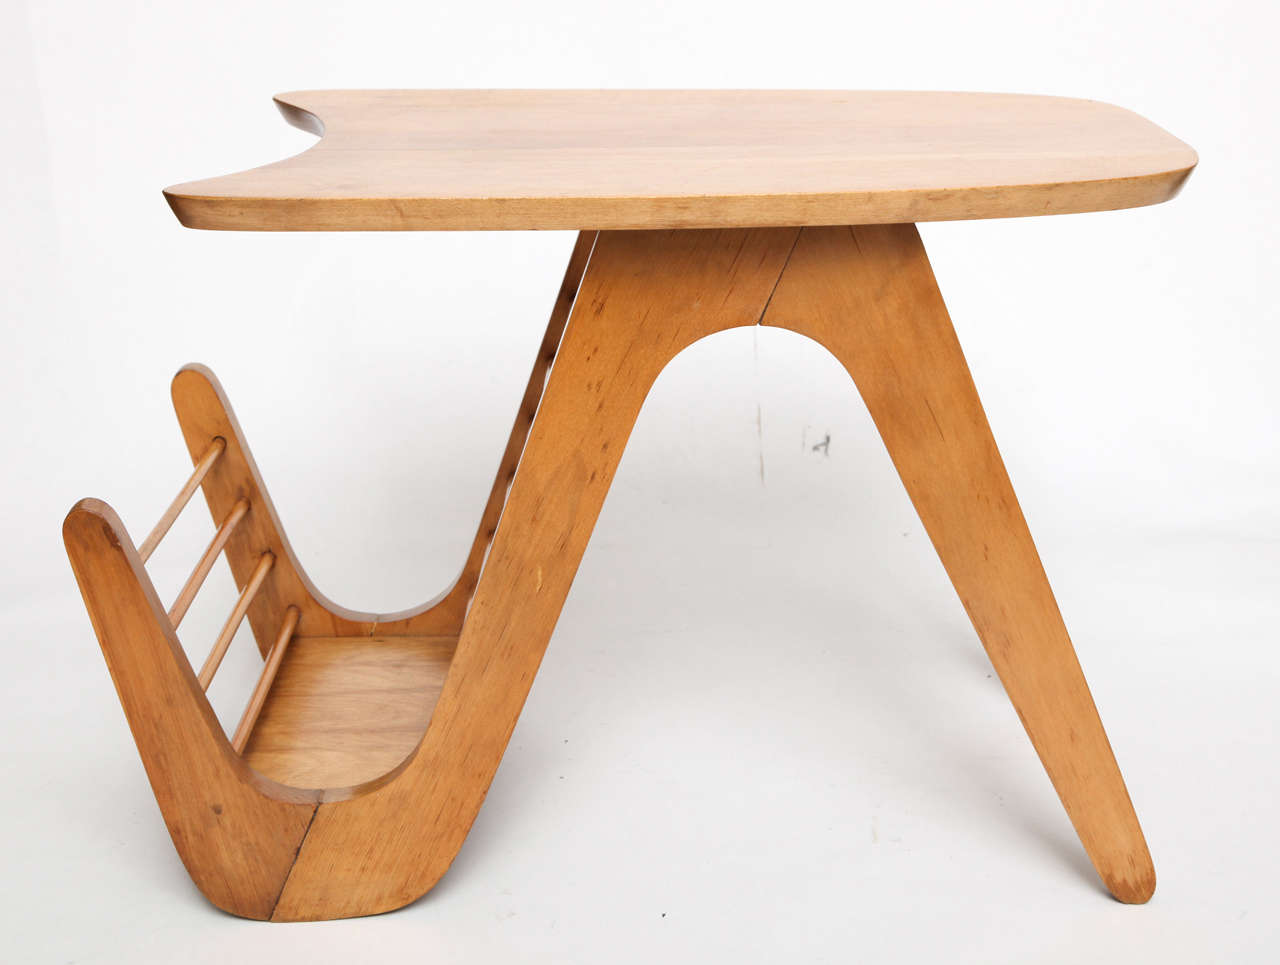 A 1940s free form table